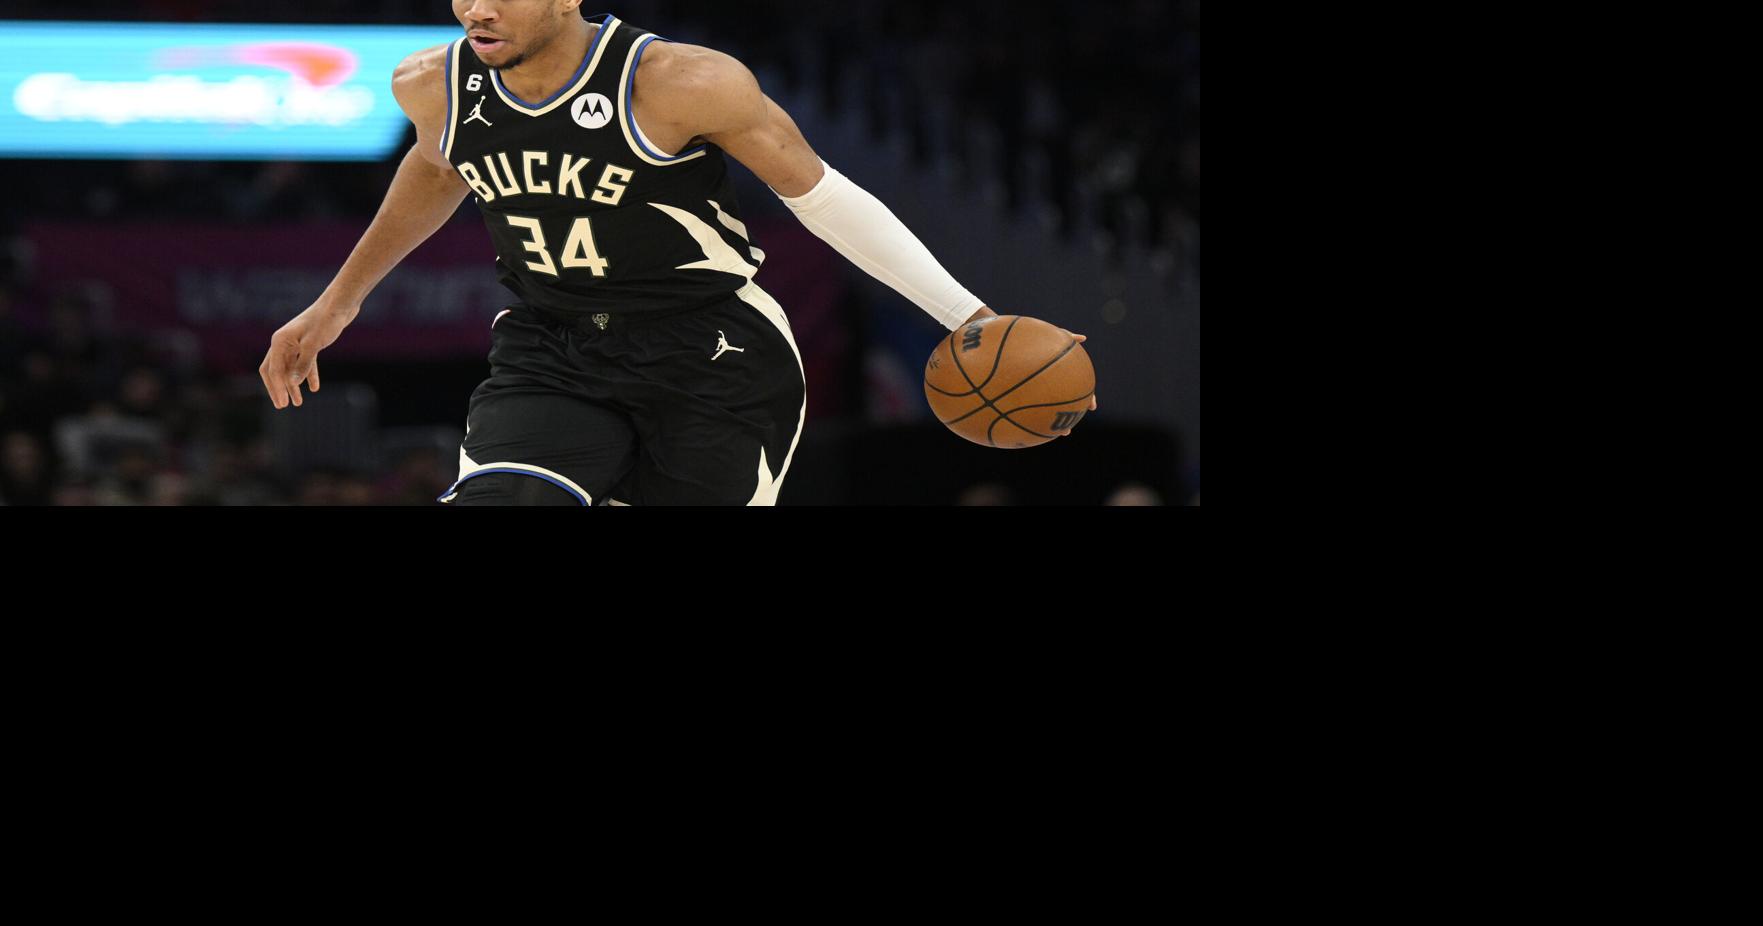 Starting Lineup Captures Giannis Antetokounmpo's Glory with Action